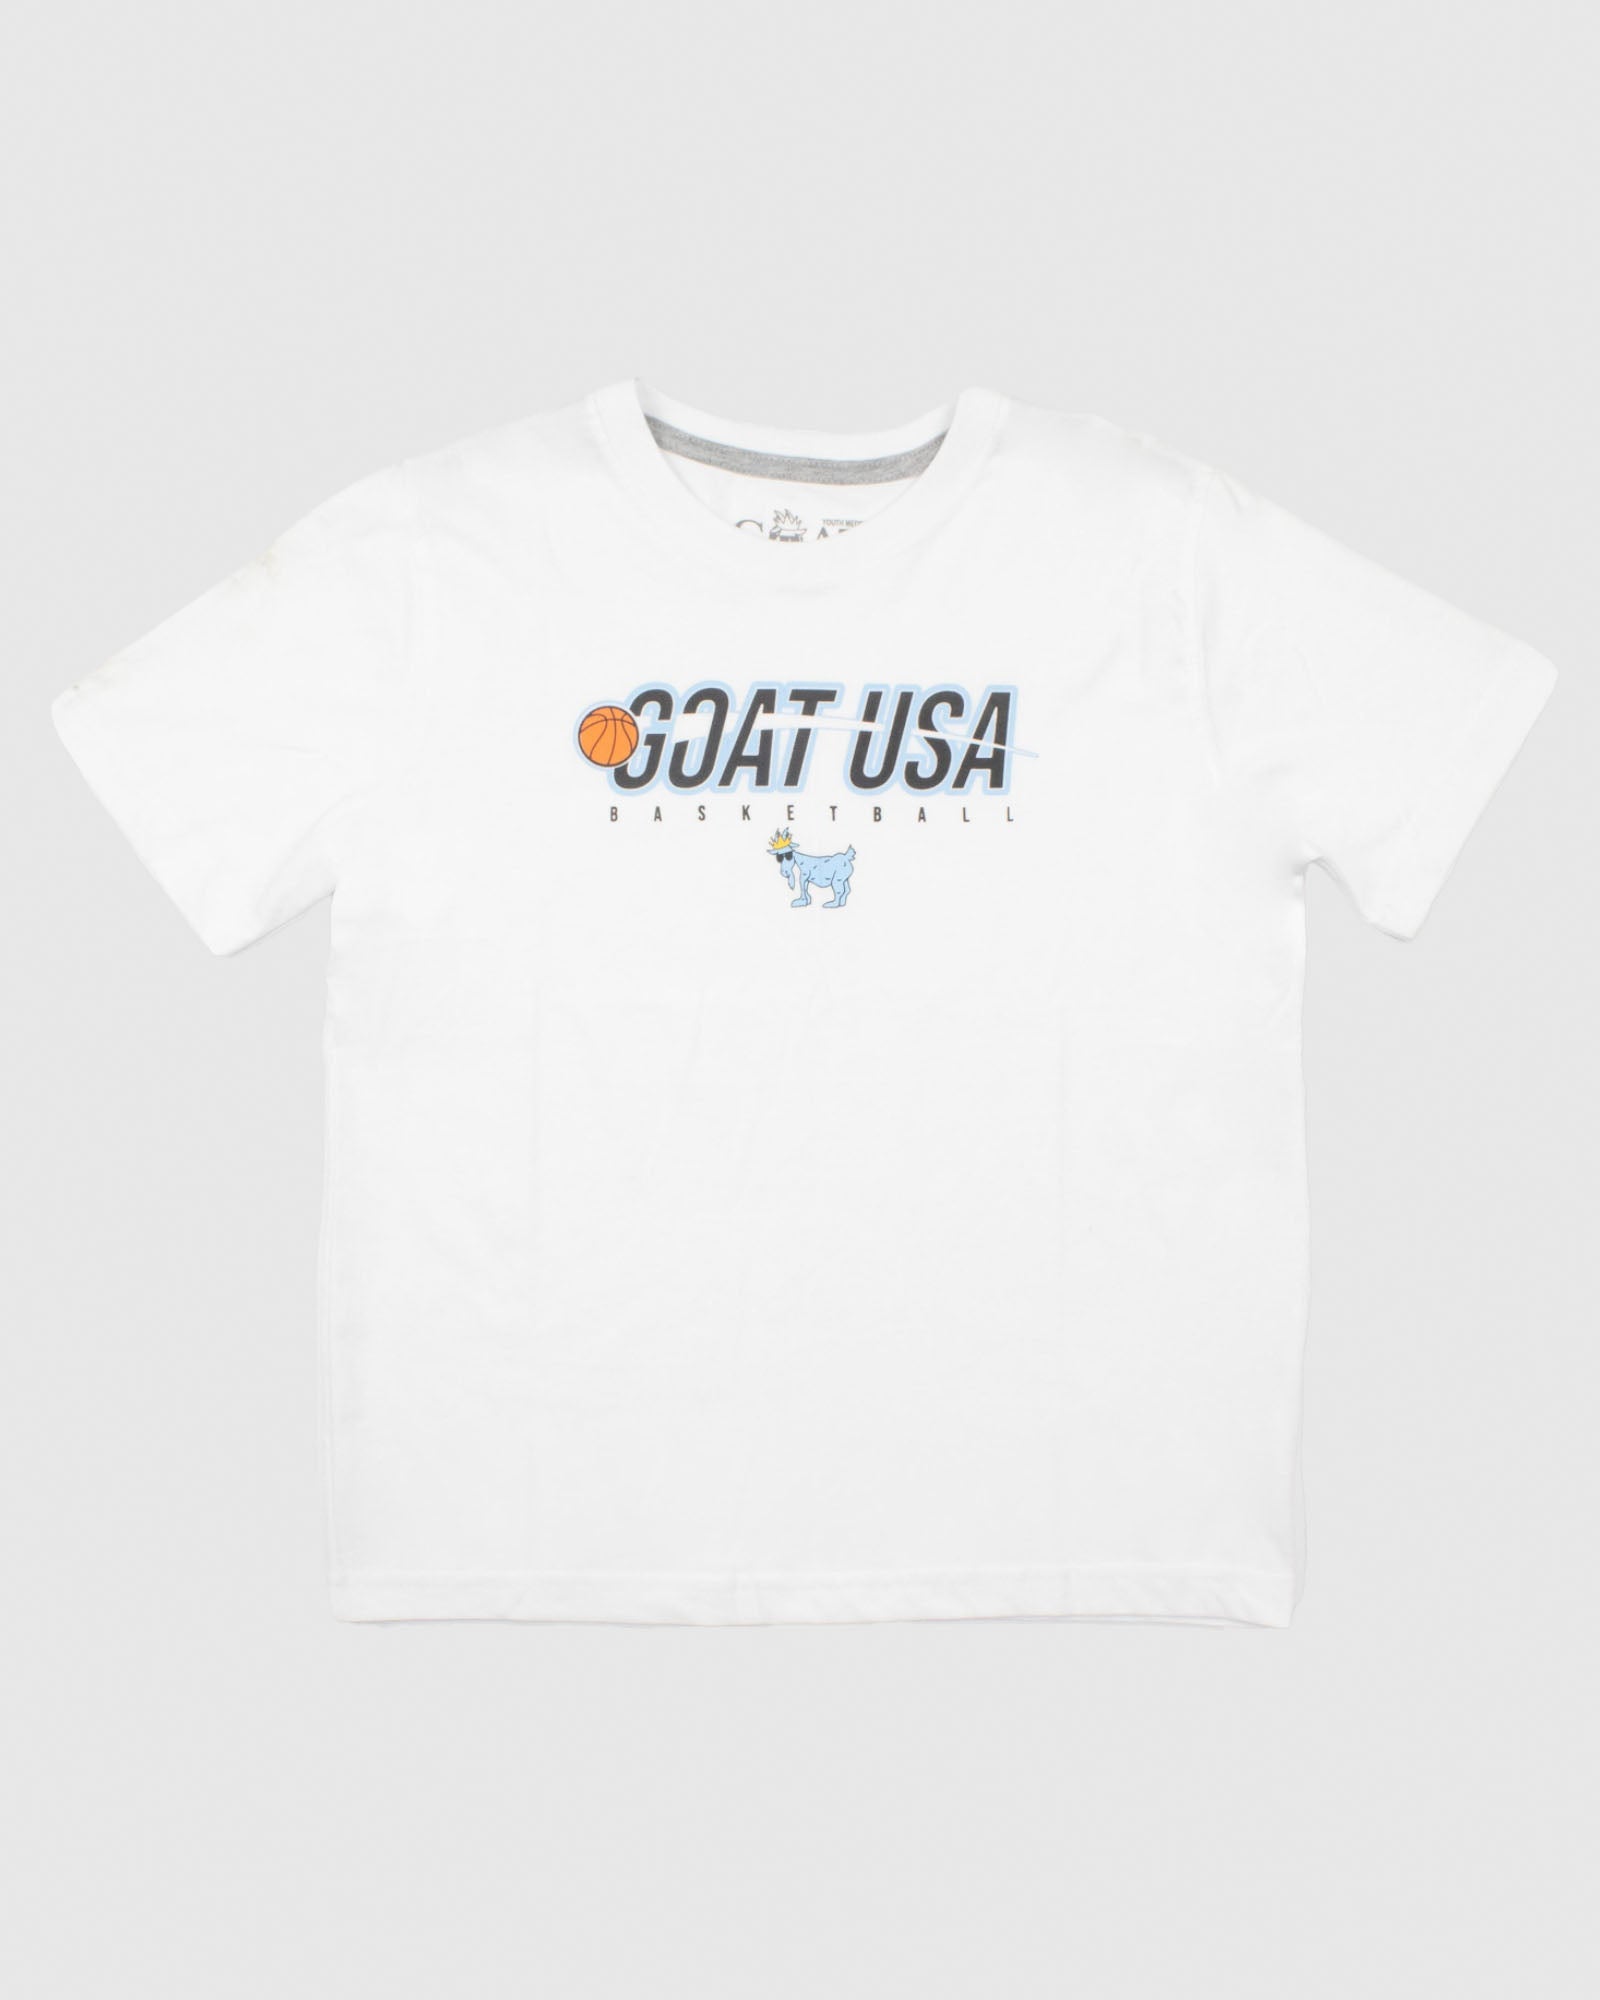 Goat USA Youth Showtime Basketball T-Shirt Apparel Goat USA White Youth Small 